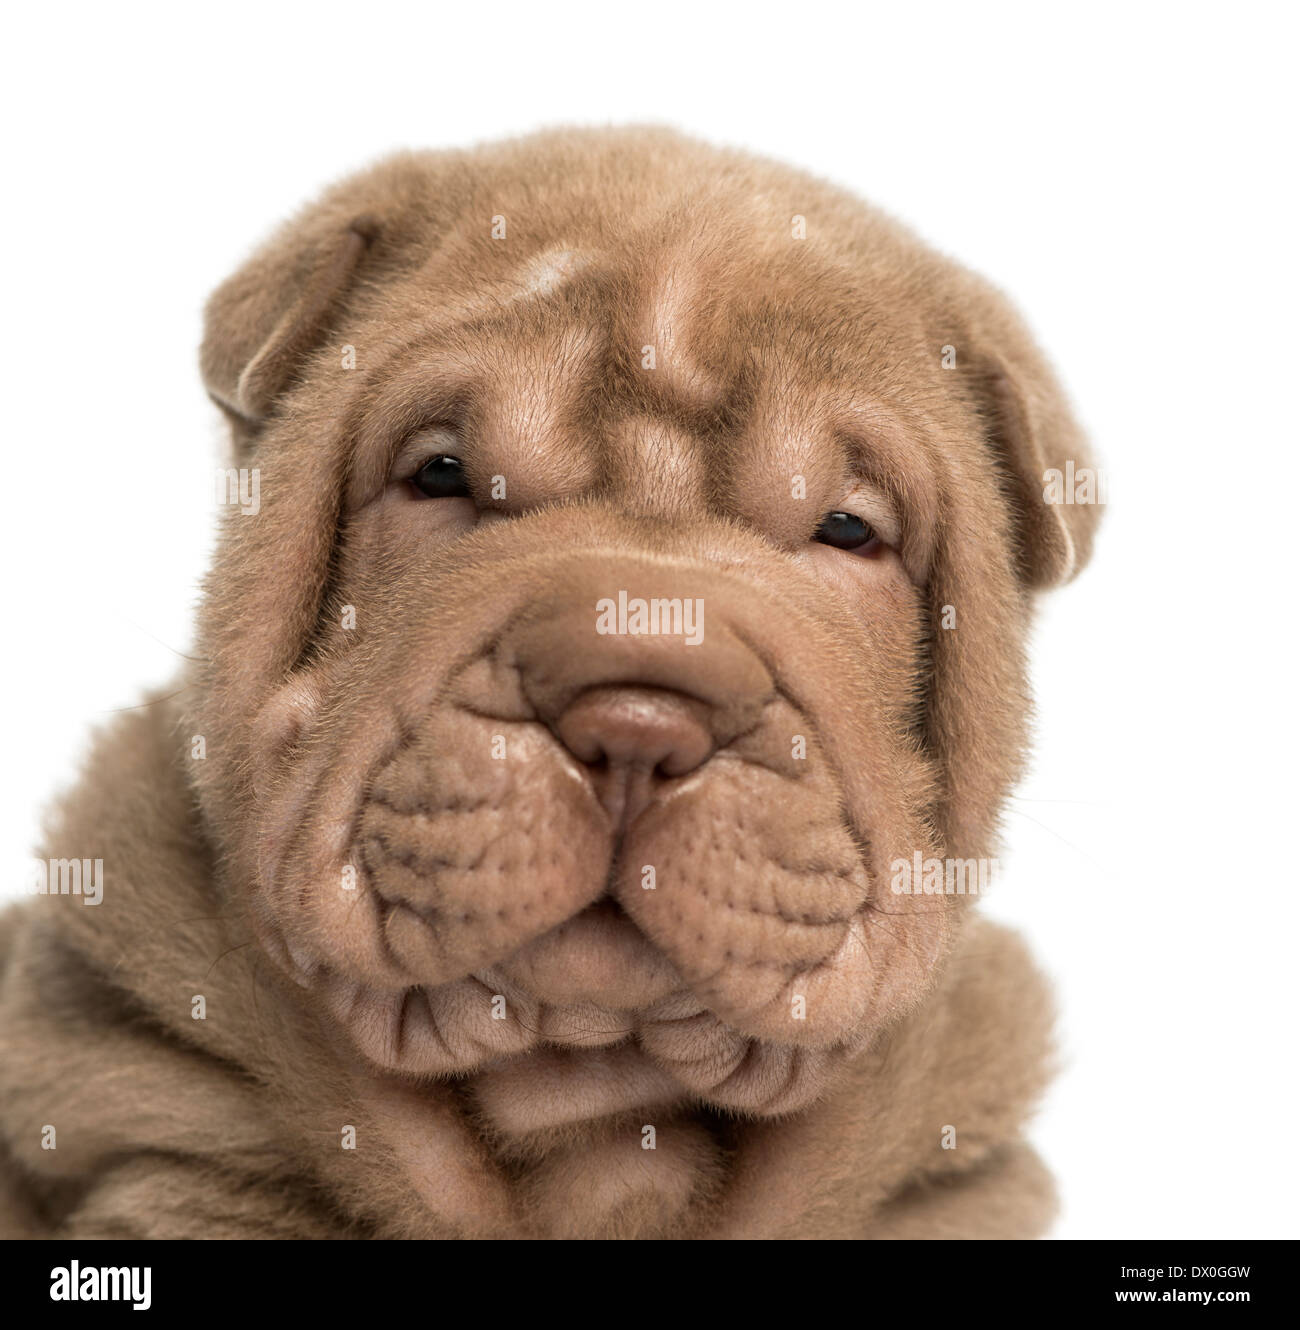 Close-up of a Shar Pei puppy looking at the camera against white background Stock Photo